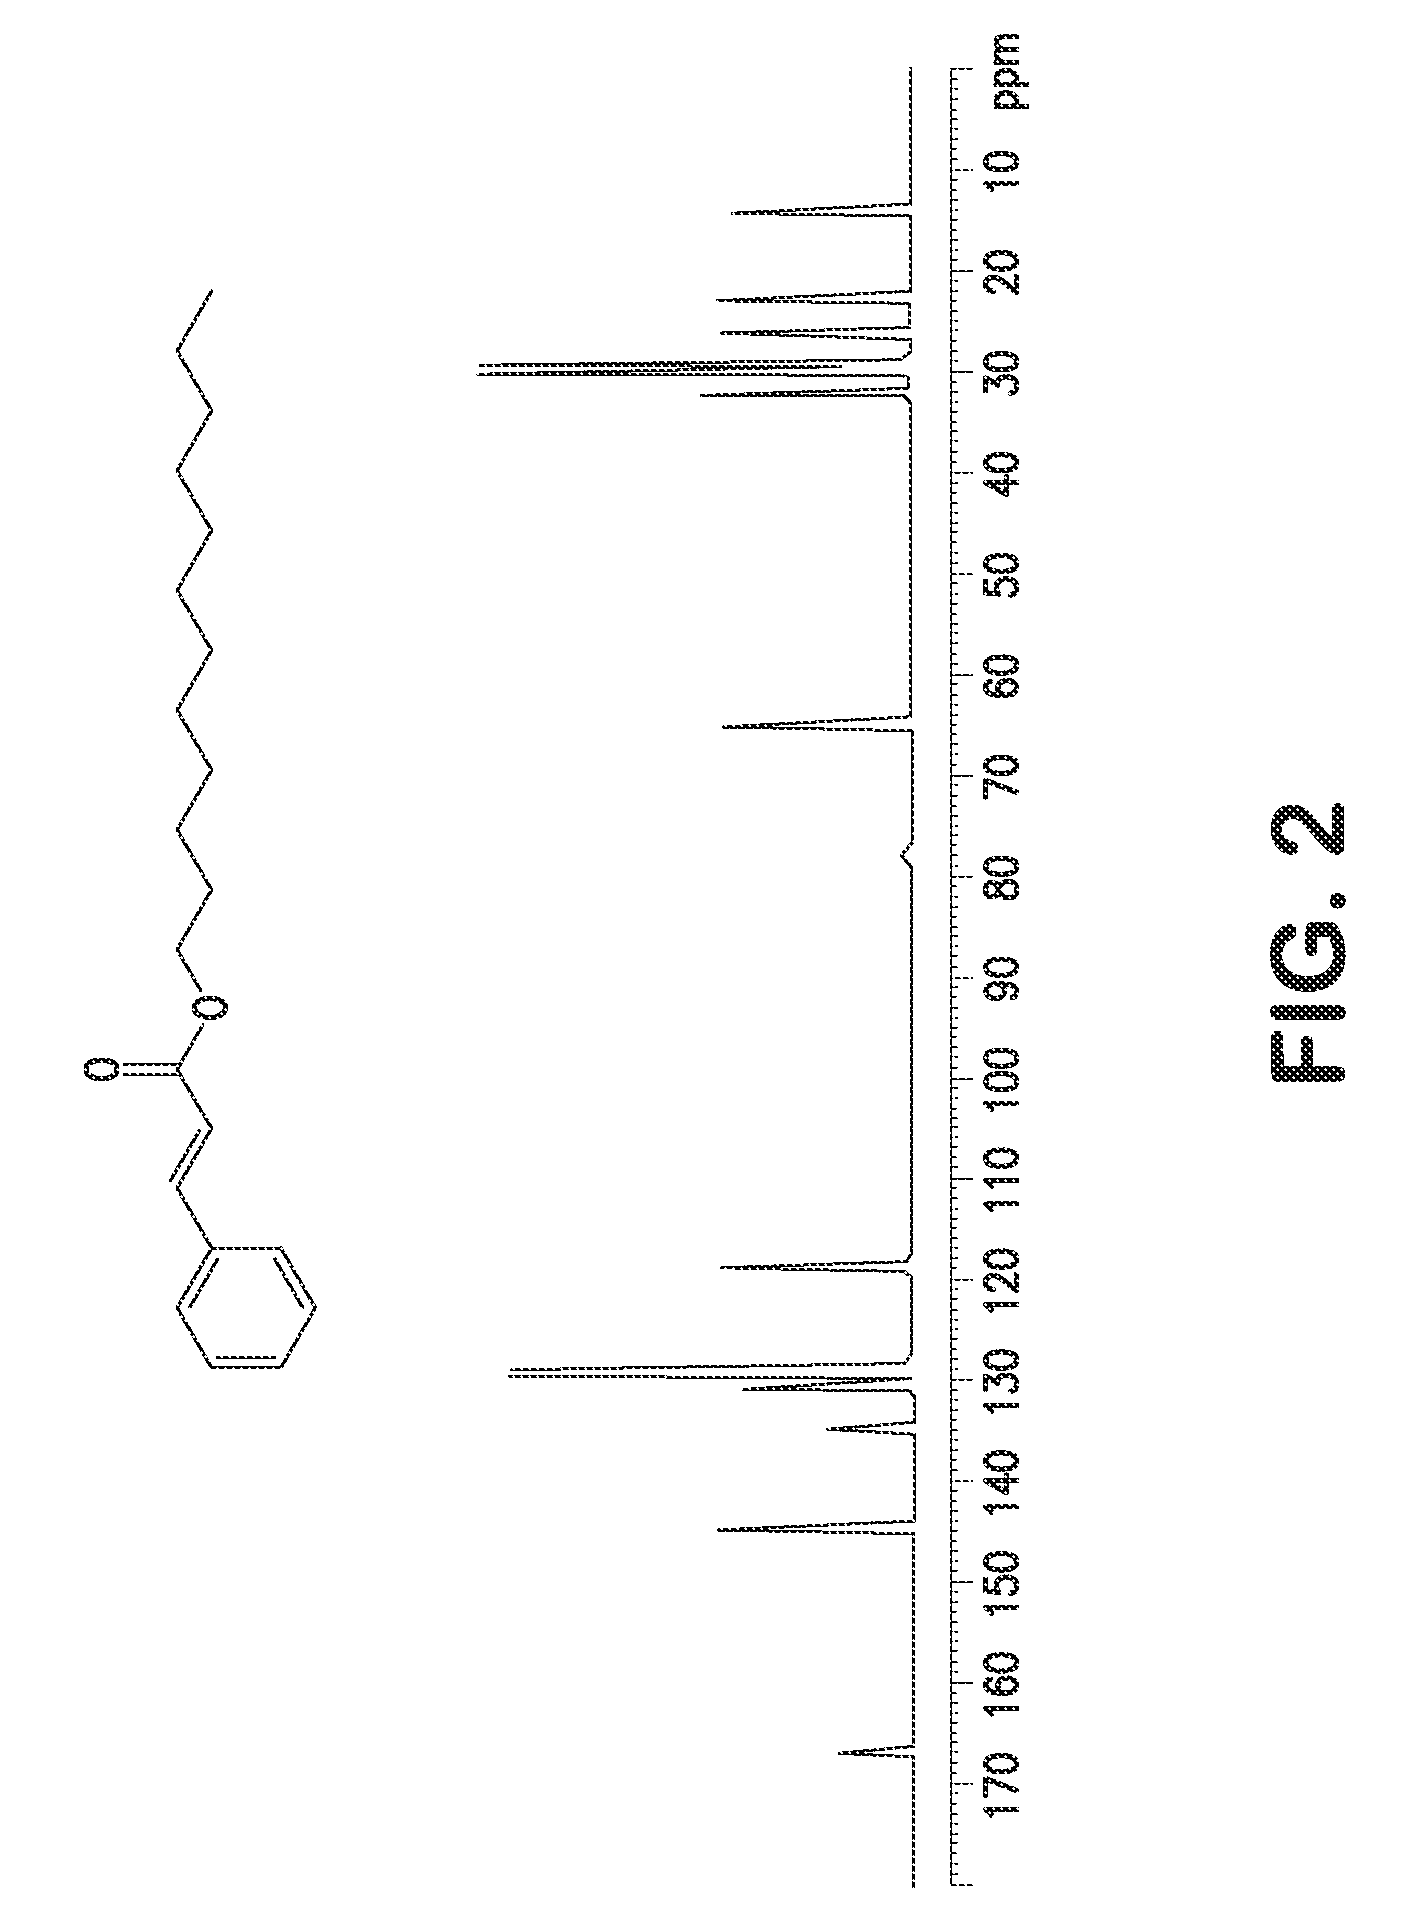 Single step green process for the preparation of substituted cinnamic esters with trans-selectivity